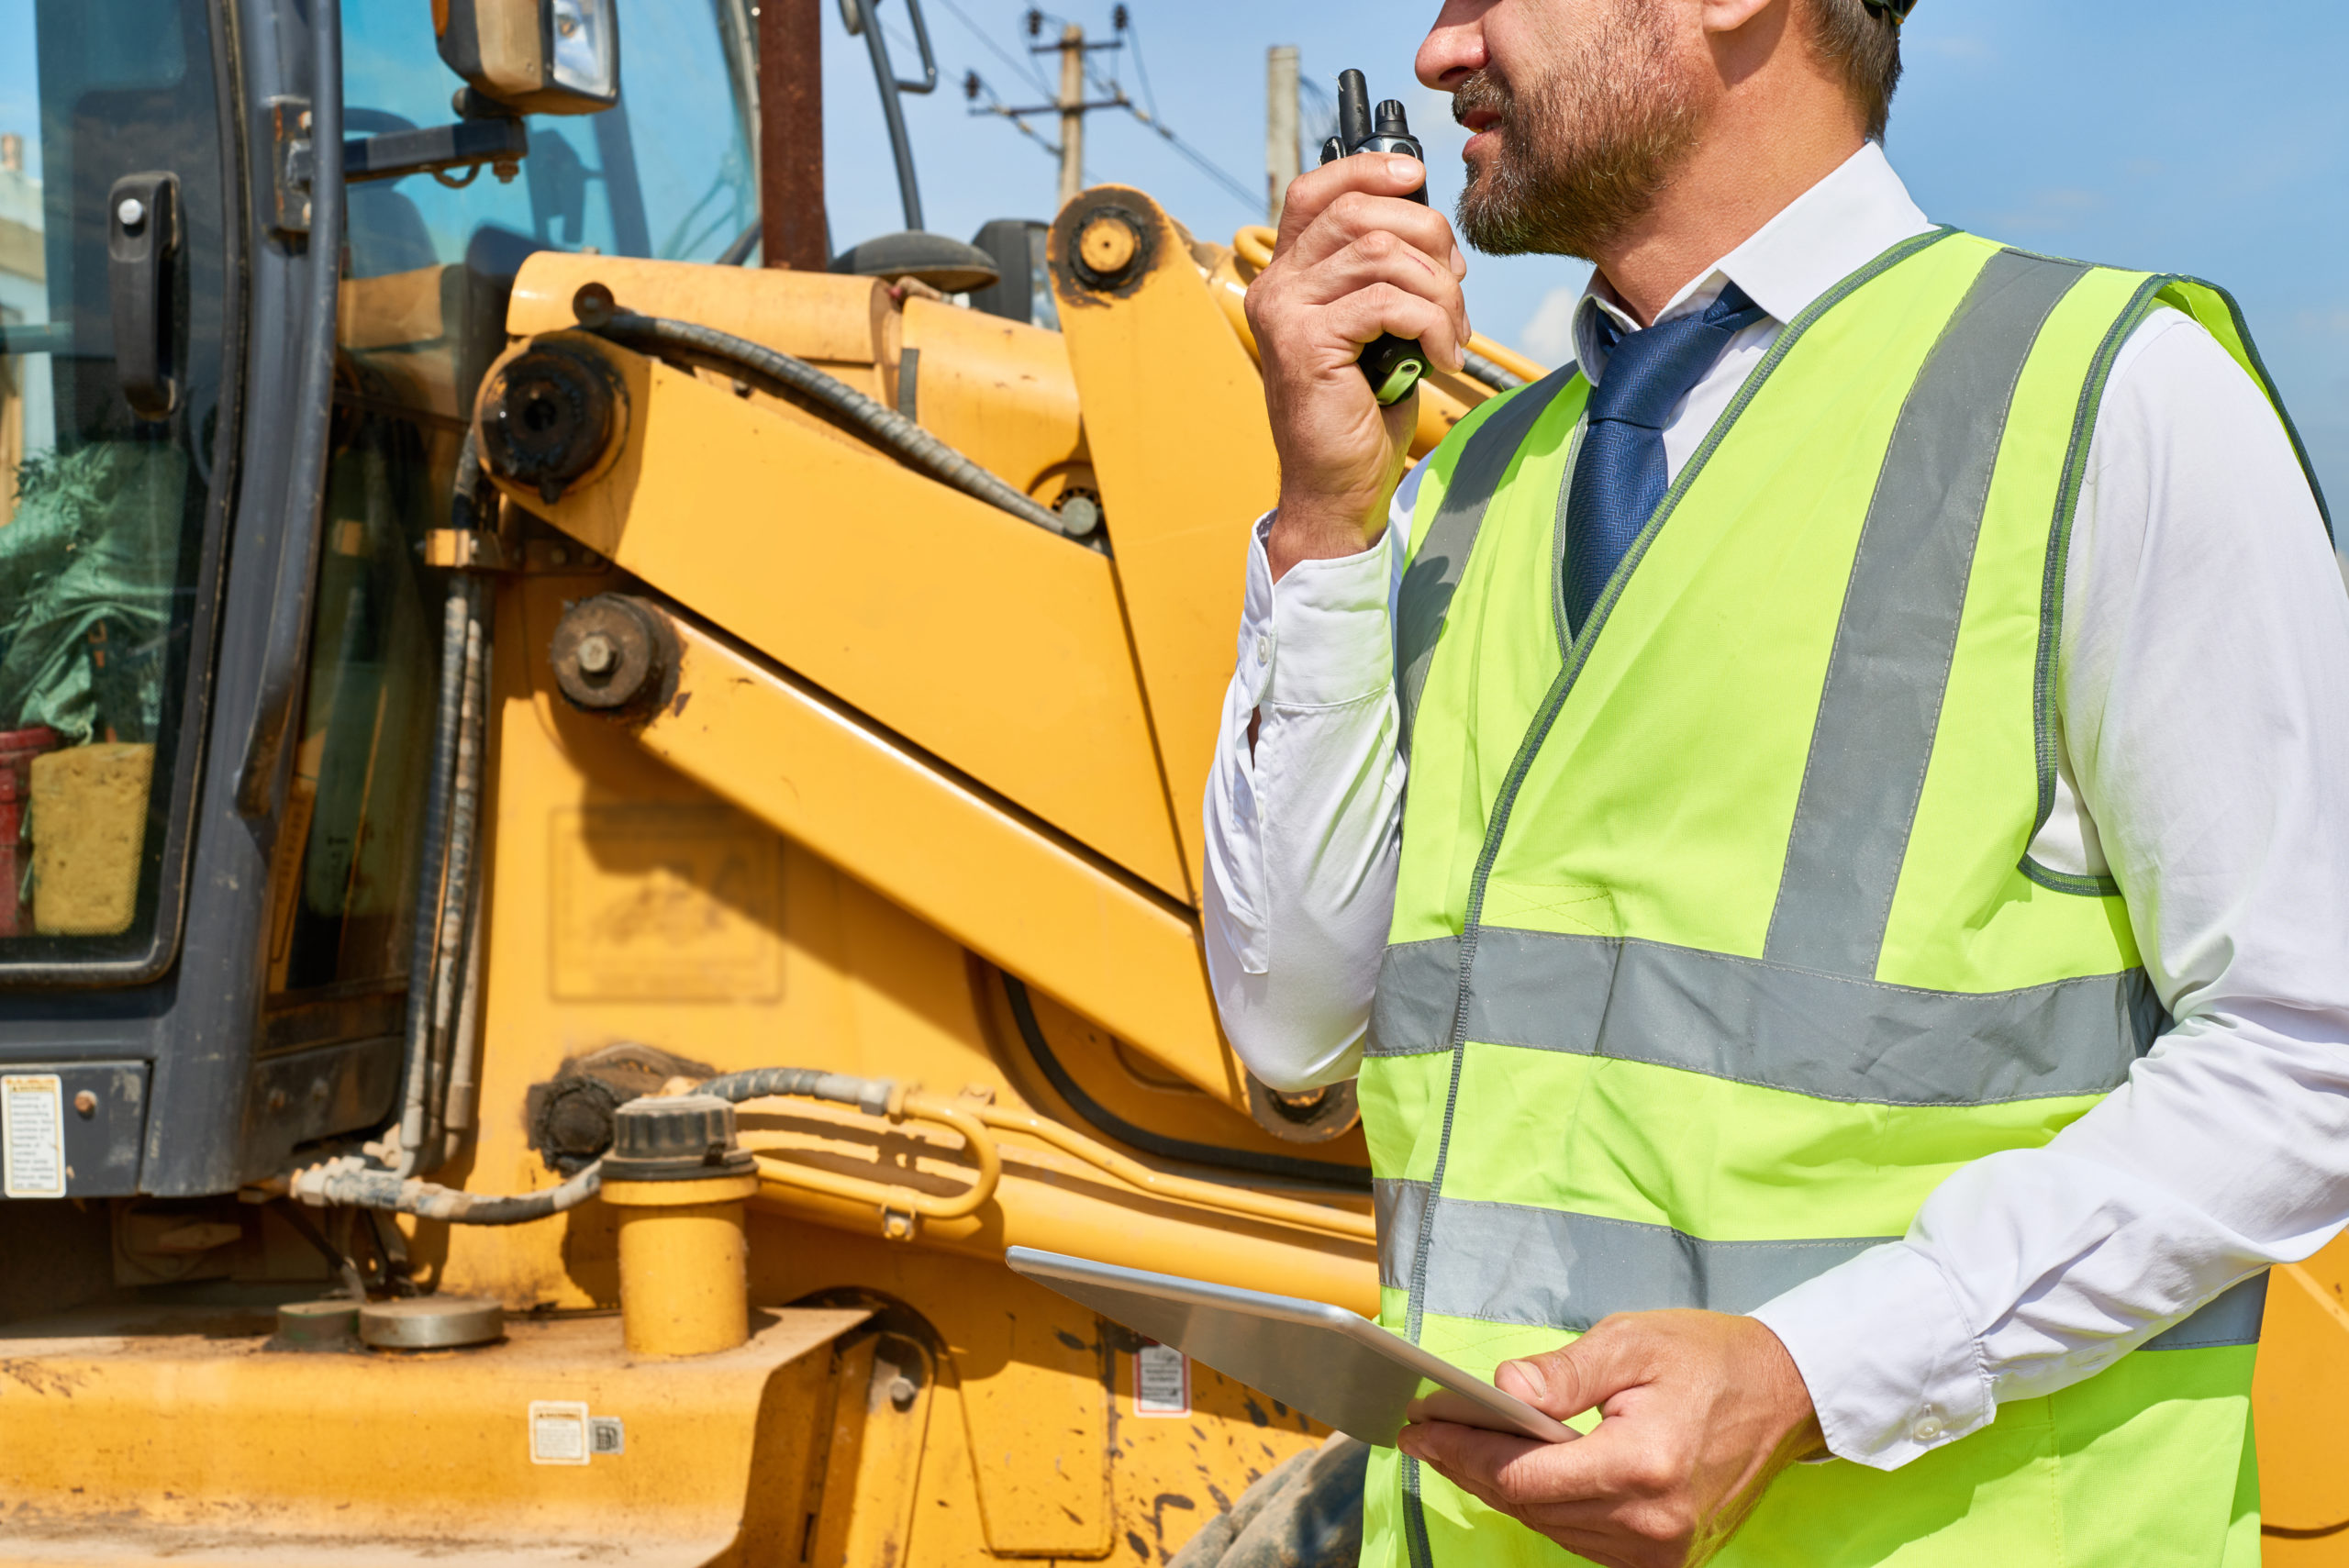 Construction Foreman uses a radio to effectively communicate with his team, while maintaining Social Distance Guidelines